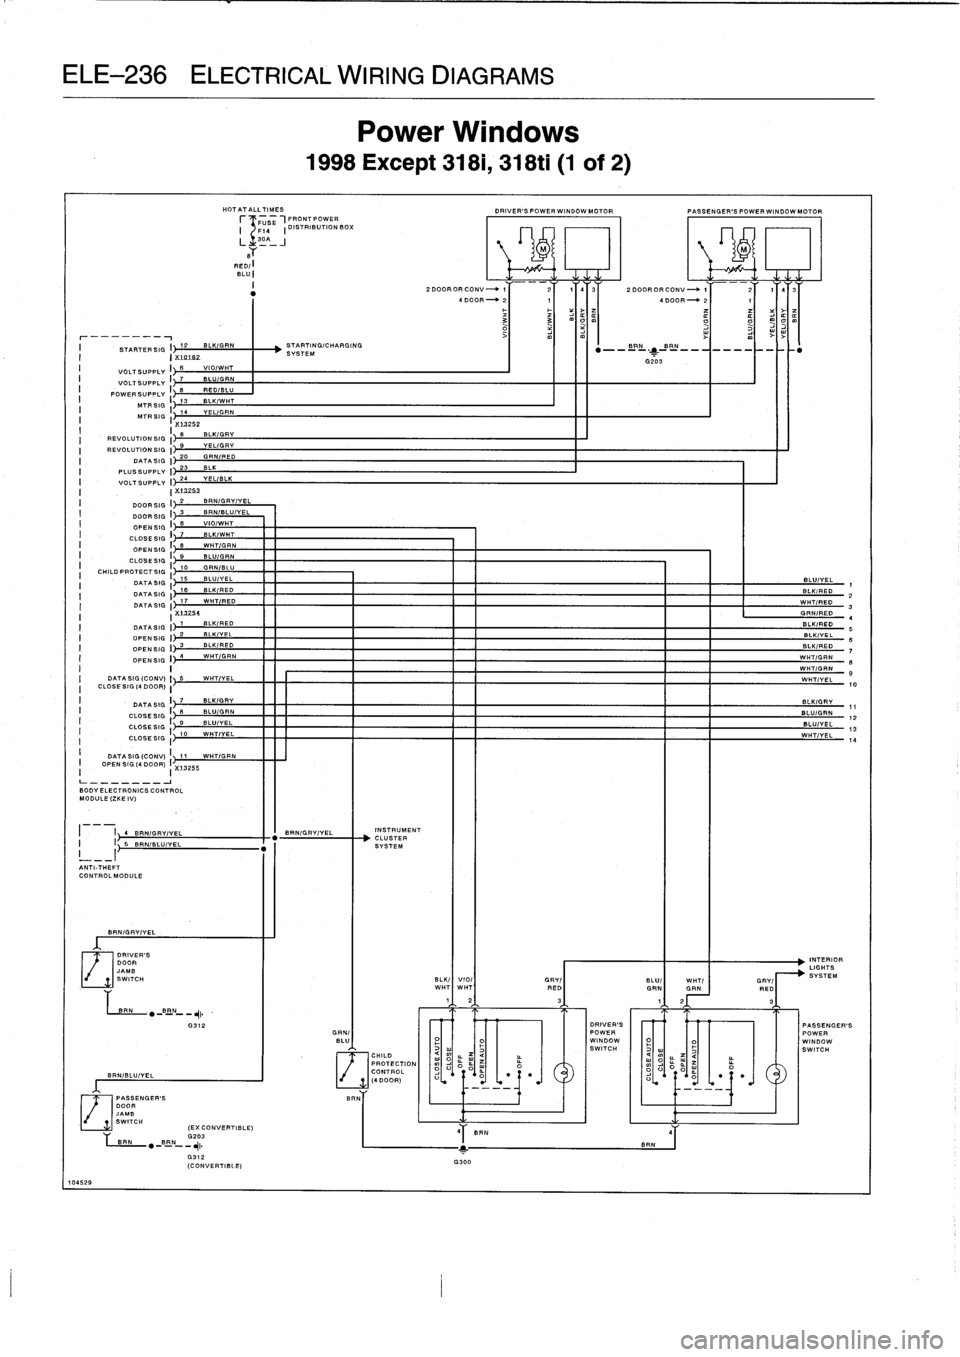 BMW 323i 1993 E36 Repair Manual 
ELE-236
ELECTRICAL
WIRING
DIAGRAMS

HOTATALLTIMES
f
-
-T
USE
-1FRONTPOWER
F14

	

I
DISTRIBUTION
BOX

RED/
:
BLU
:

I

	

STARTERSIG
I
12

	

BLKIGRN

	

STARTING/CHARGING
I

	

I
X
10182

	

SYSTEM
